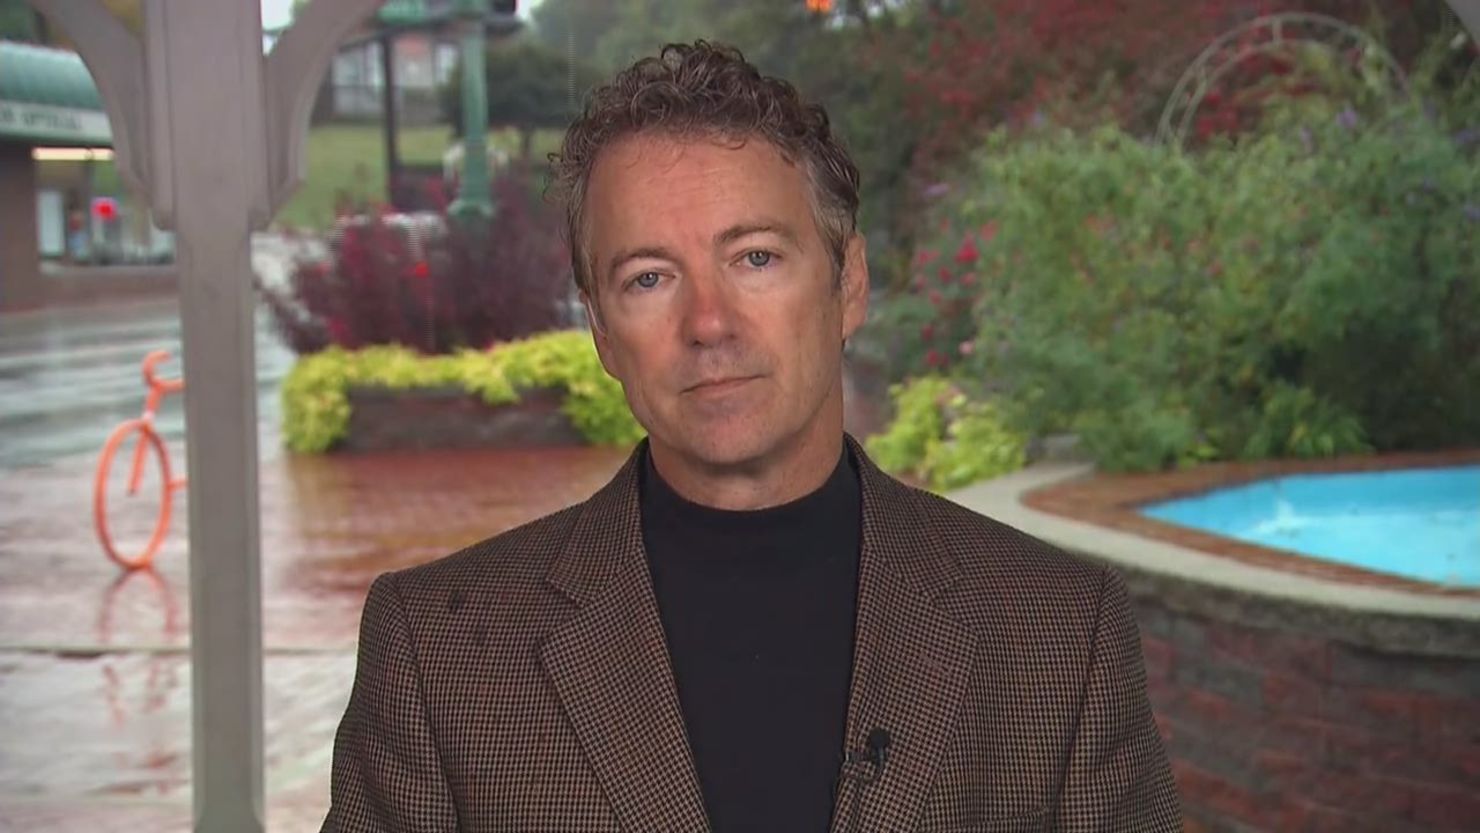 Sen. Rand Paul has said repeatedly that he's considering a run for president in 2016